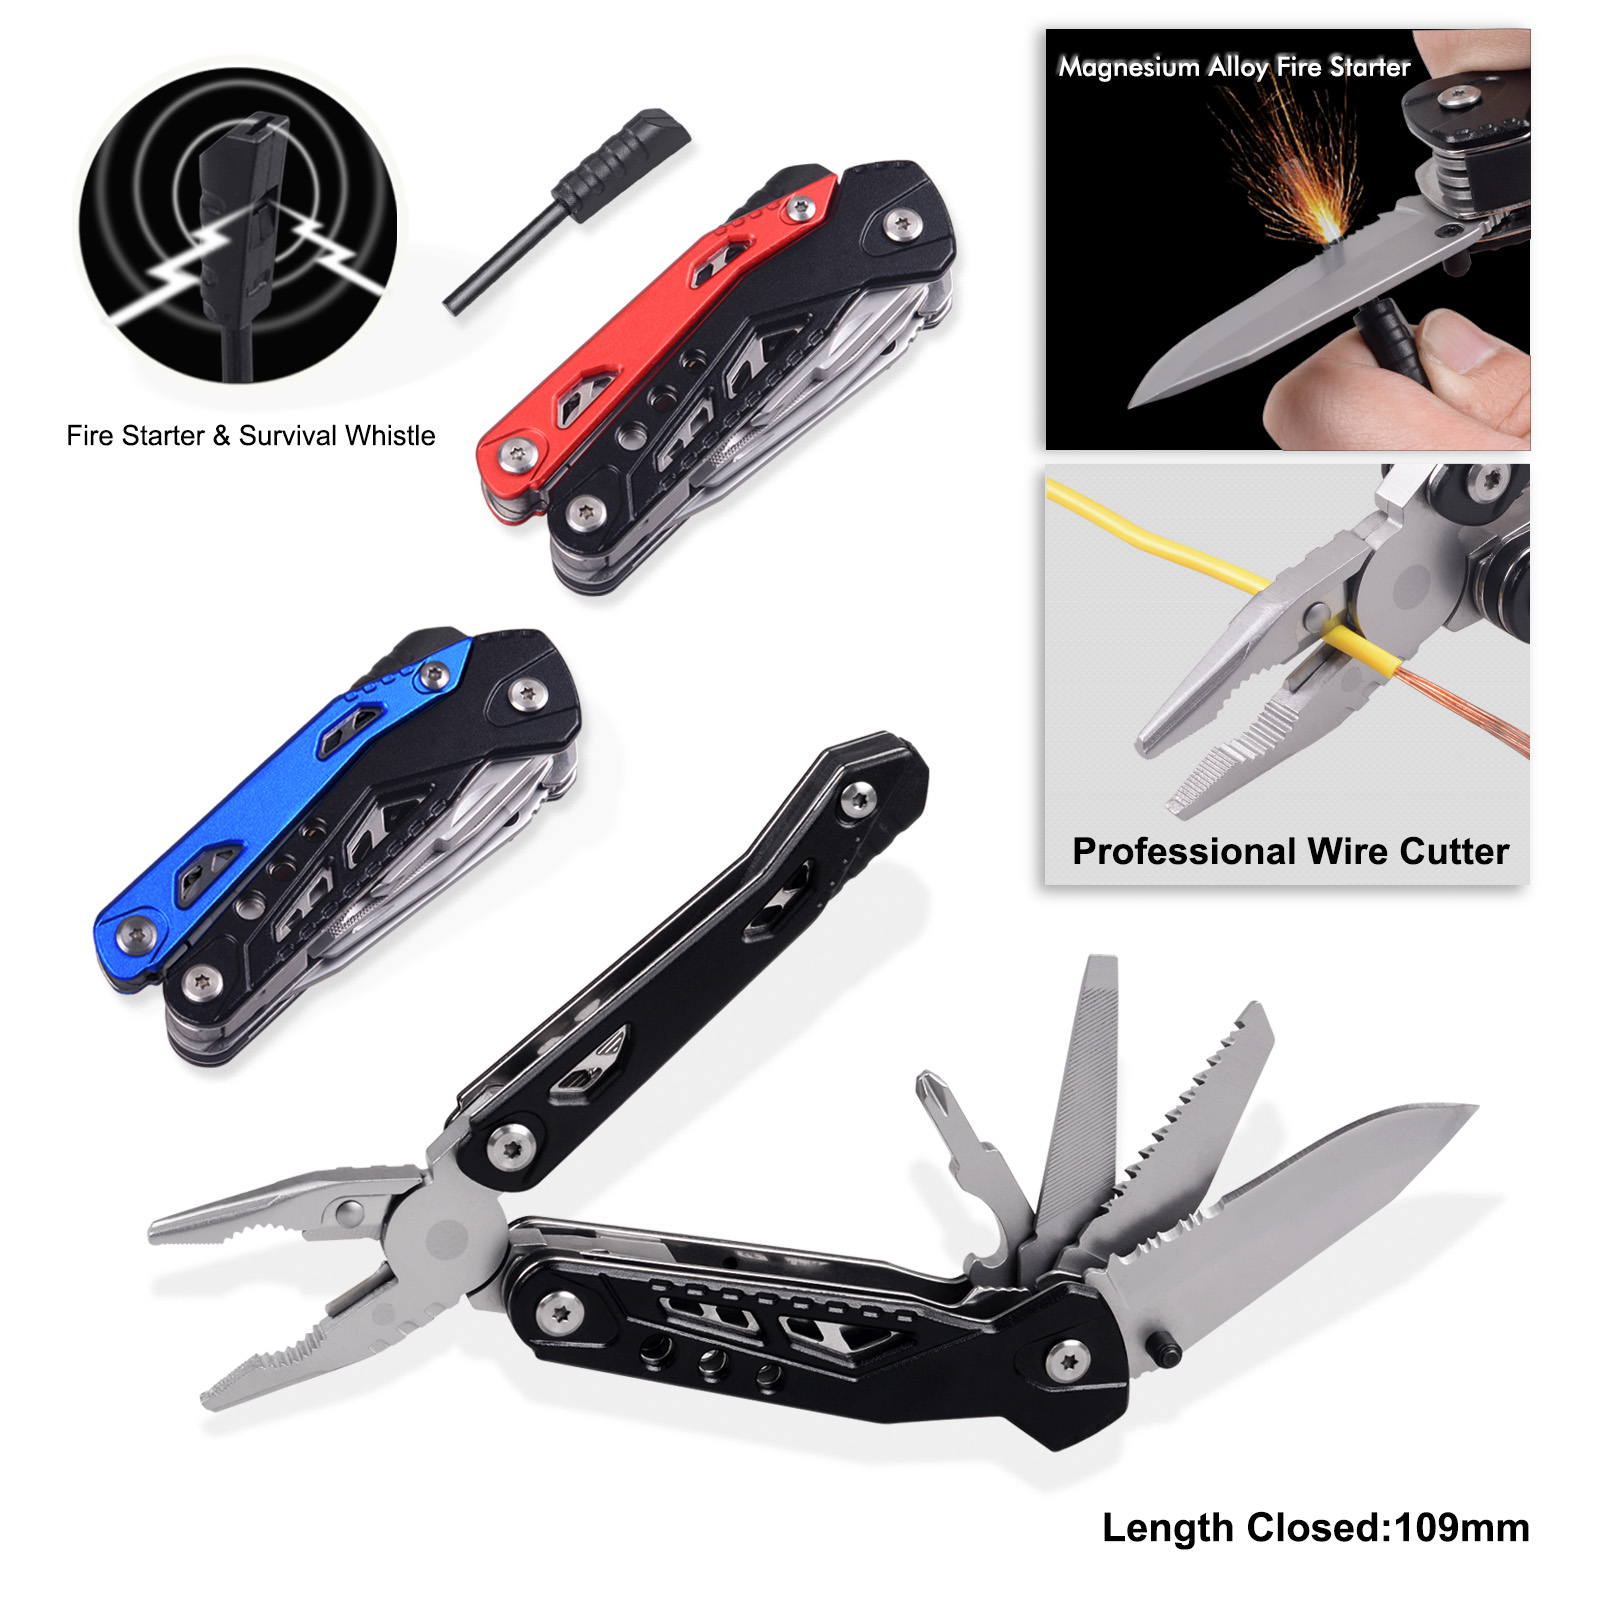 #8508 Multi Function Tools with Fire Starter and Survival Whistle